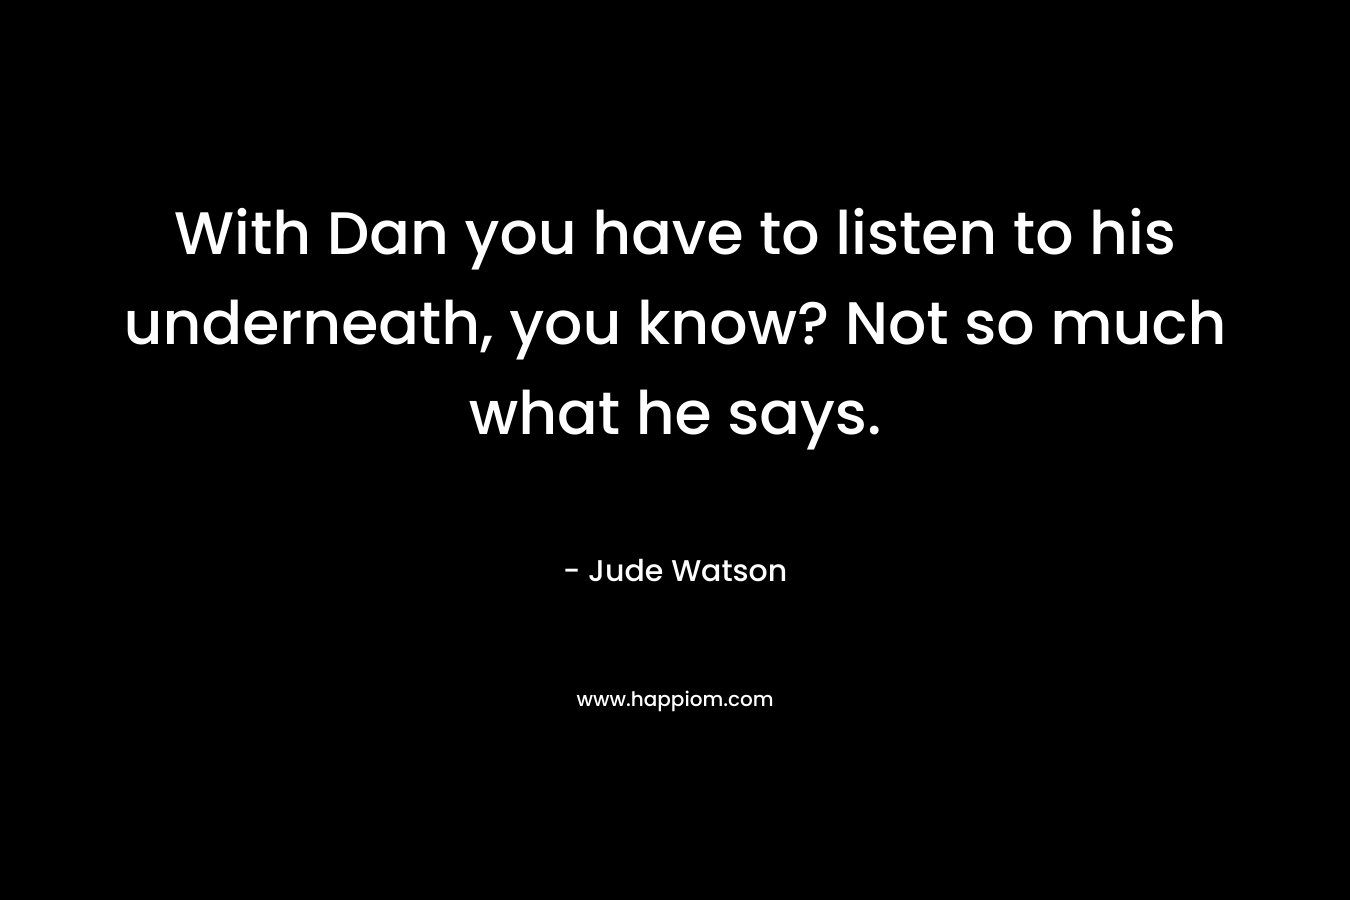 With Dan you have to listen to his underneath, you know? Not so much what he says.